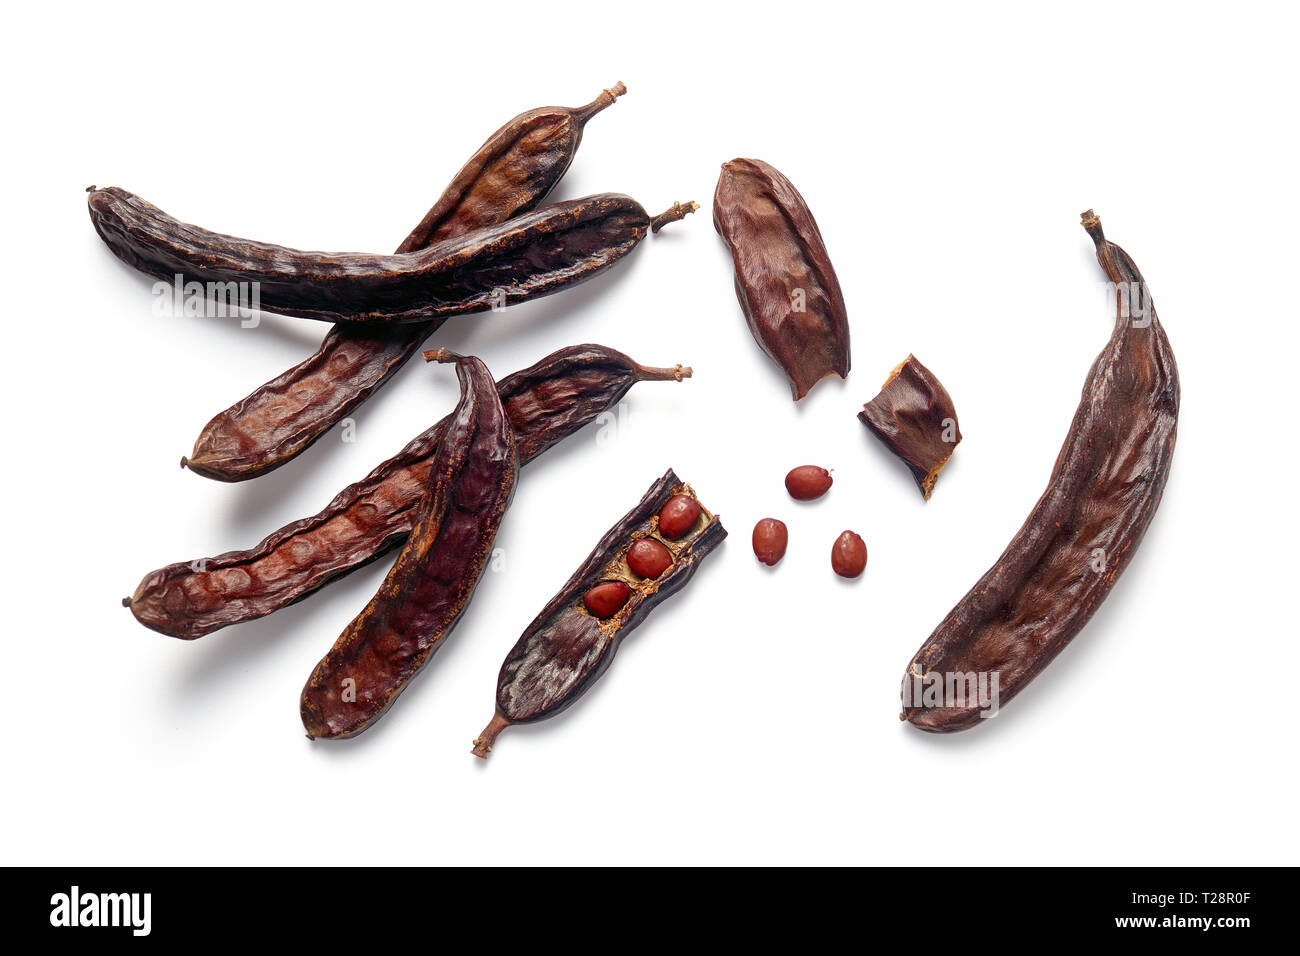 Carob bean pods and seeds on white background Stock Photo